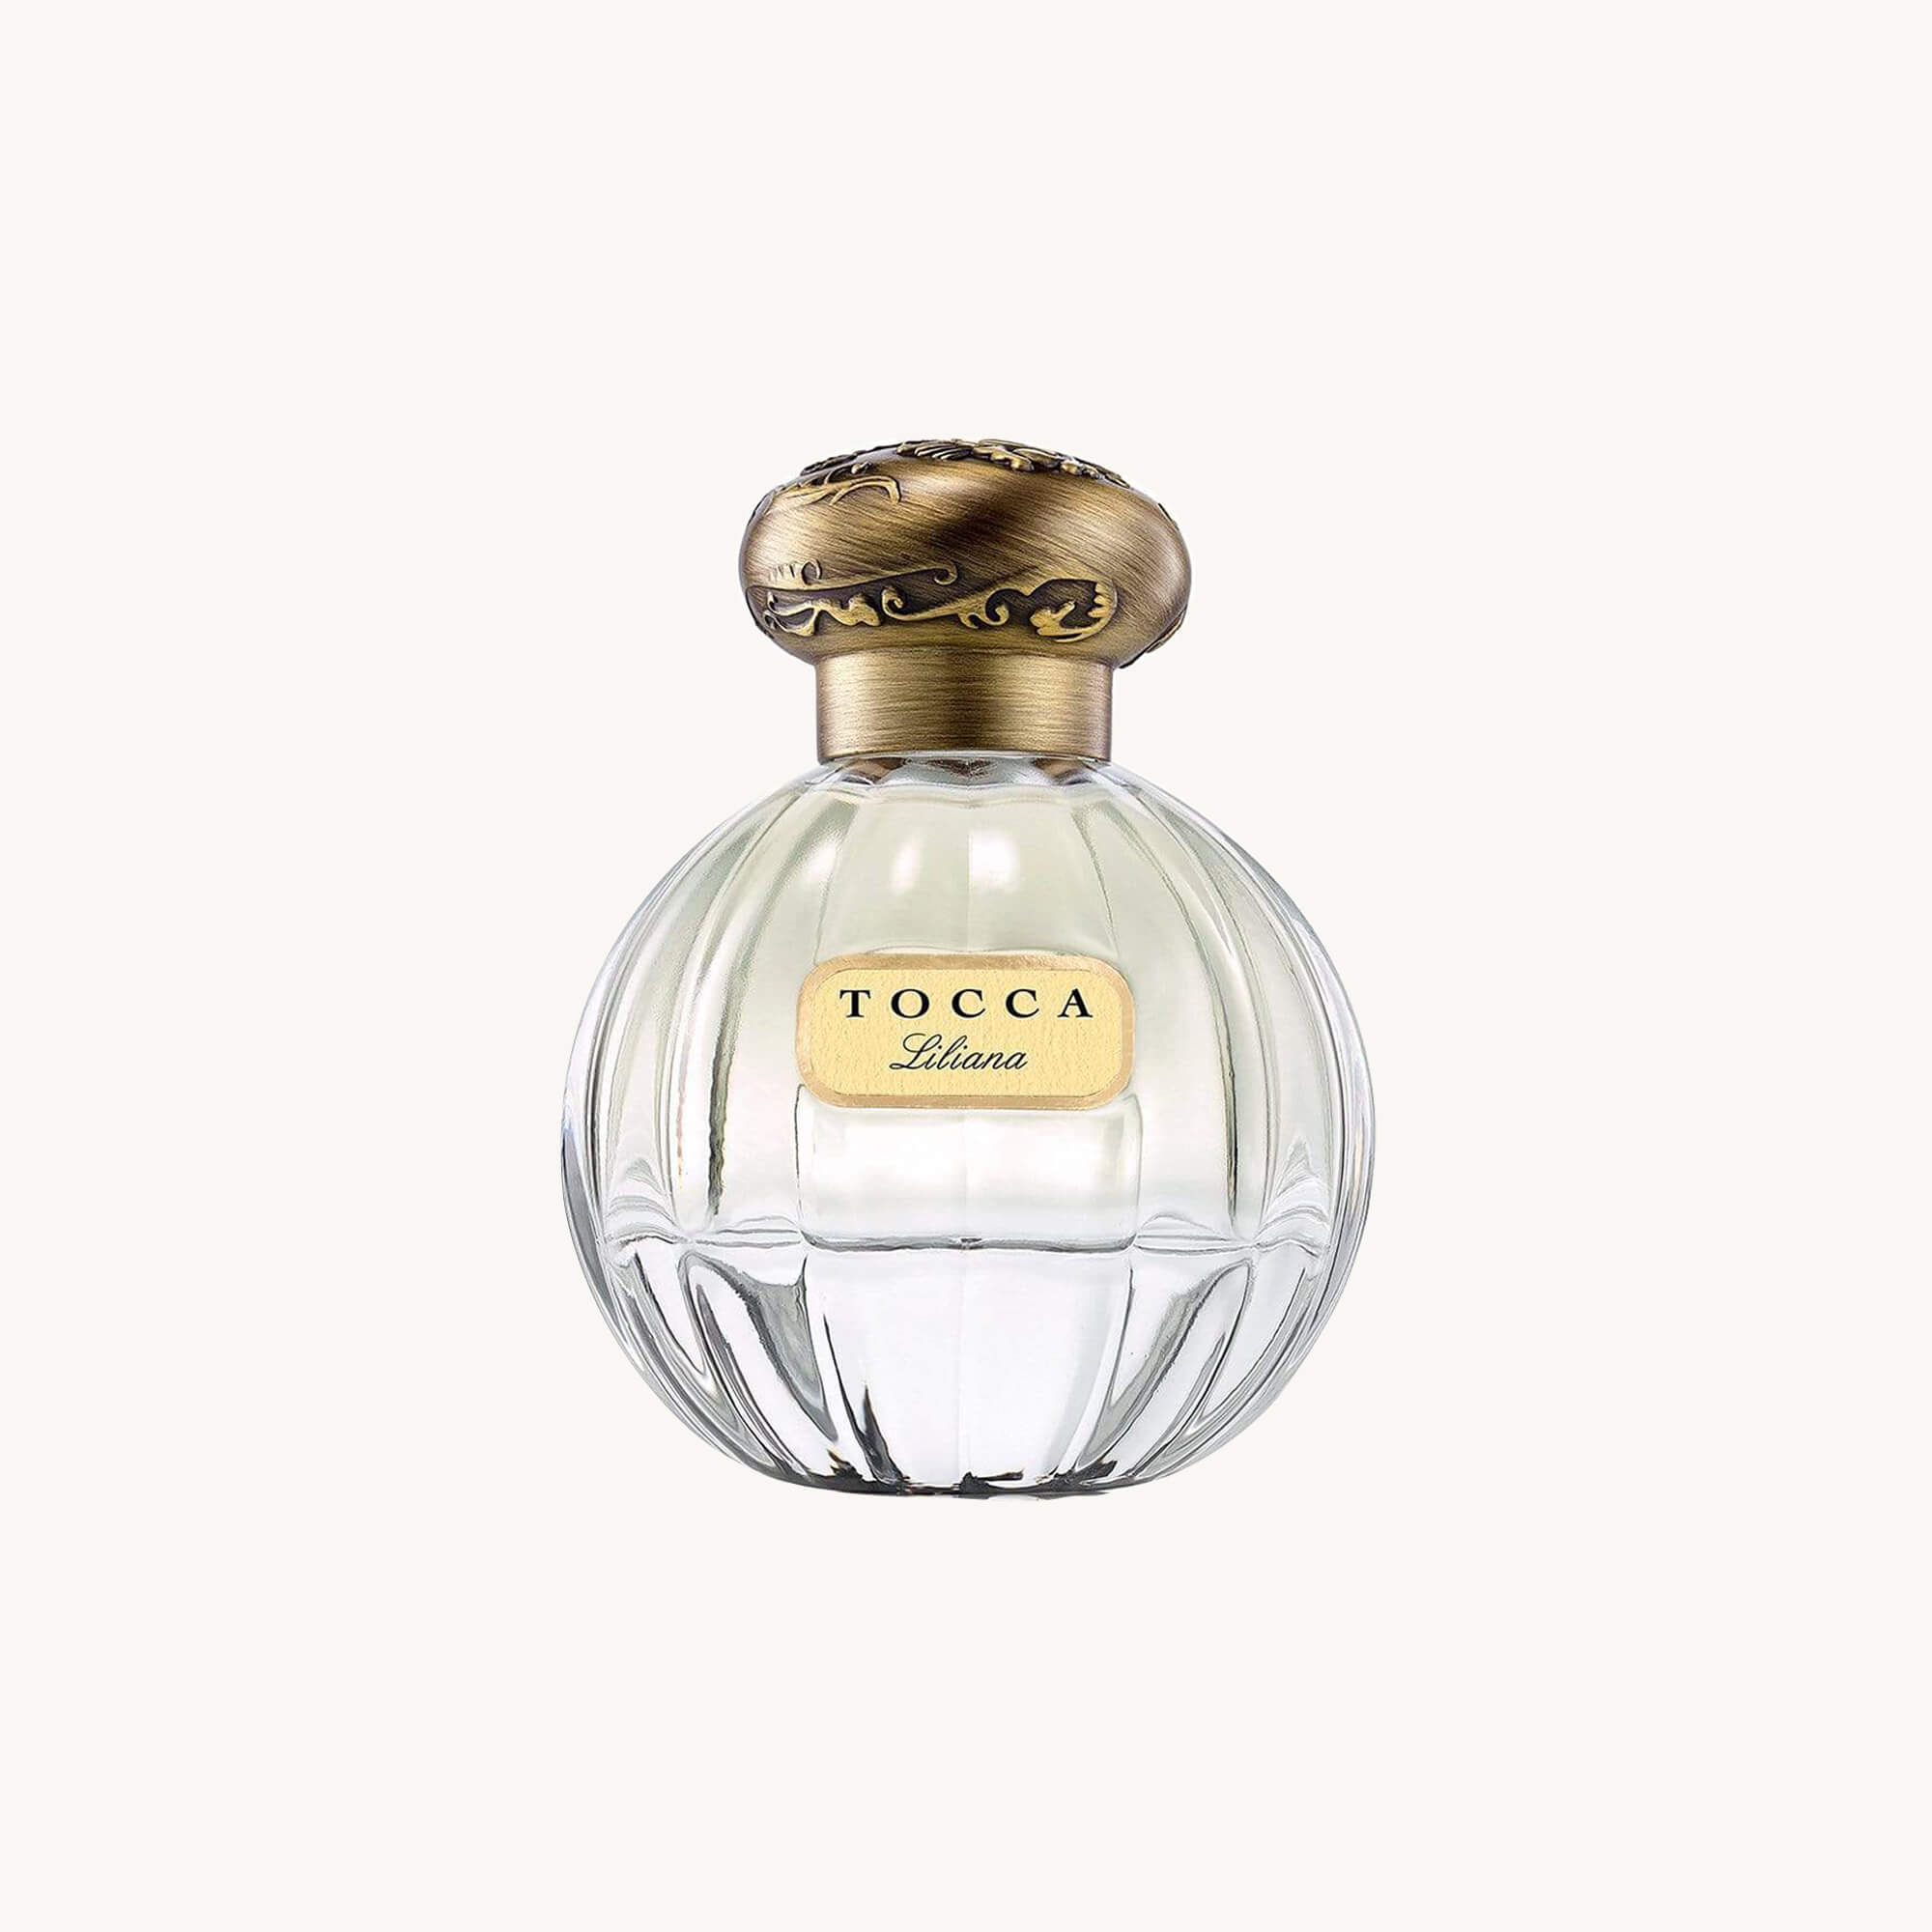 TOCCA Beauty and Home Fragrance Products